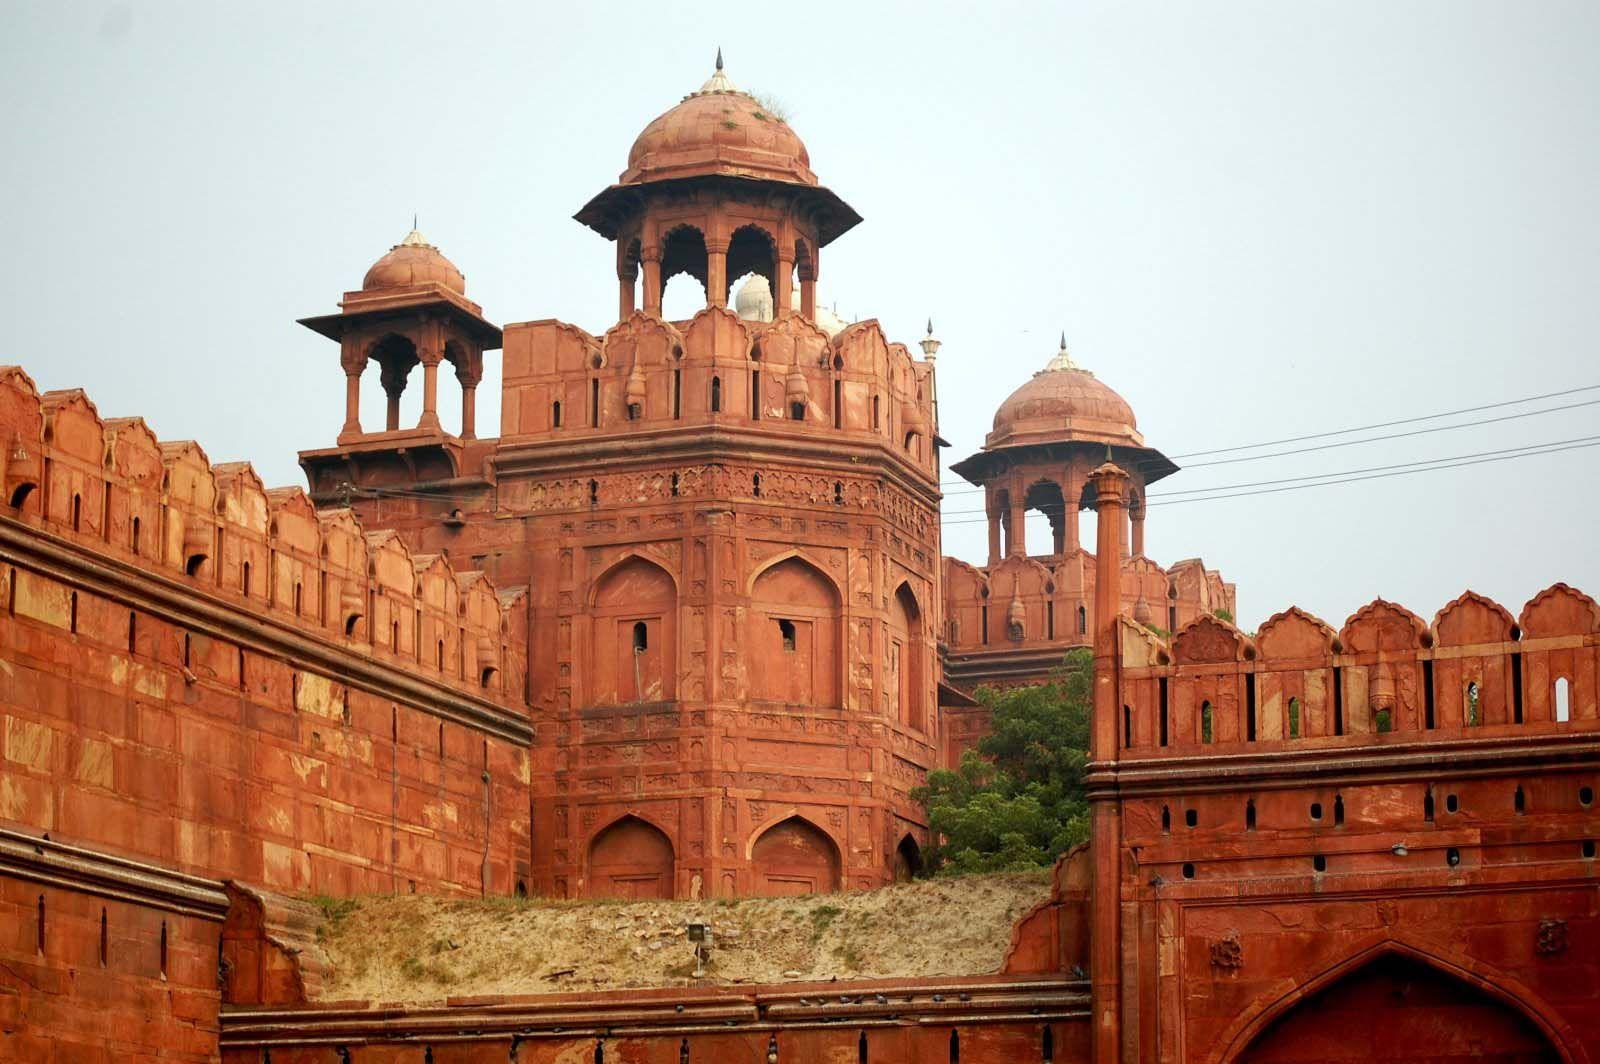 The Lal Kila Wallpaper (Red Fort) from HD Gallery. Image